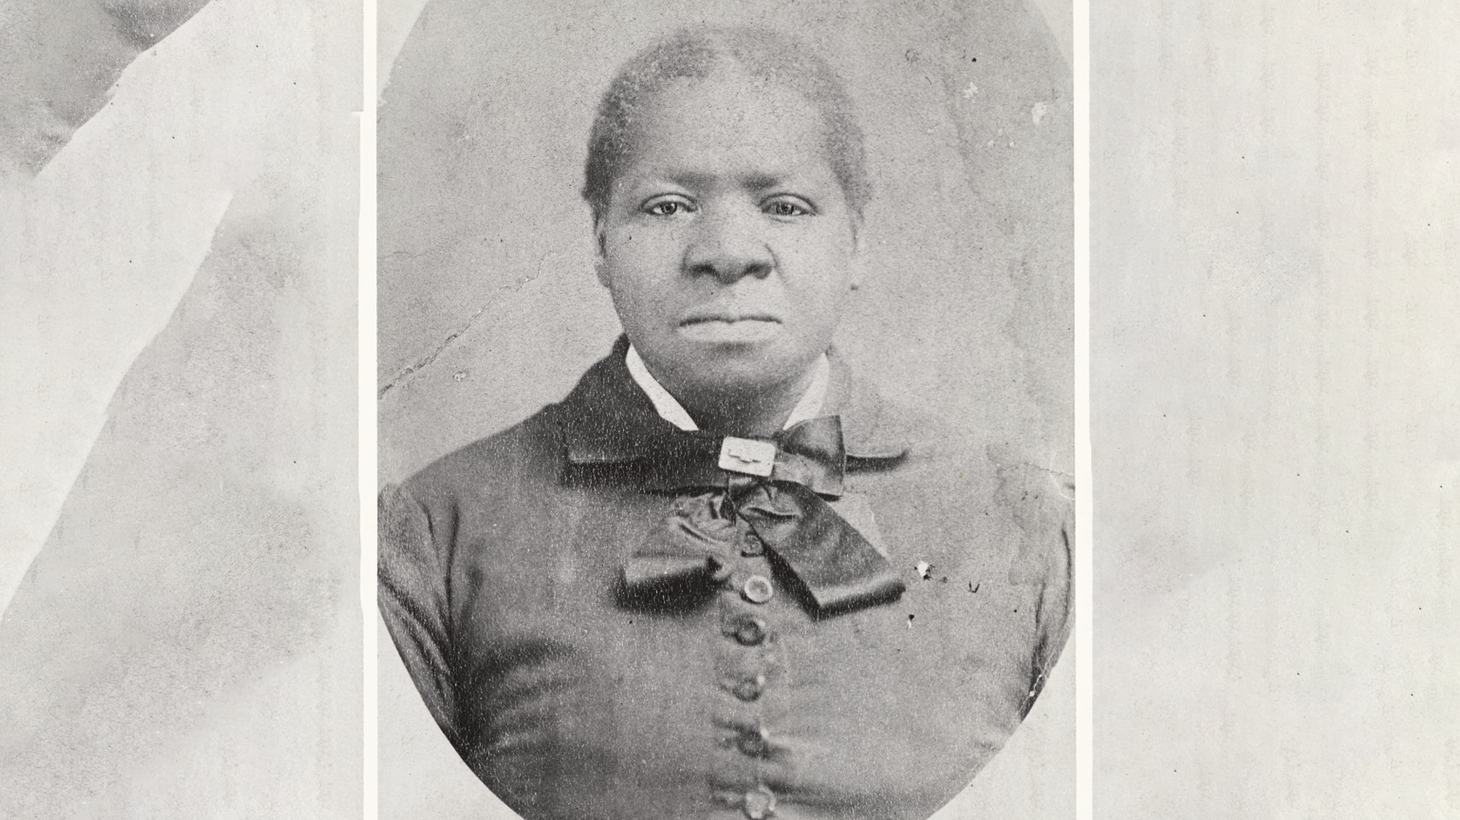 This is the only known photographic portrait of Biddy Mason (1818-1891). “This is a person who was born a slave, was able to create something wonderful and lasting in one of the greatest cities in the world. Her story needs to take up public space and public consciousness,” says Brenda Stevenson, a UCLA professor of history and African American Studies.